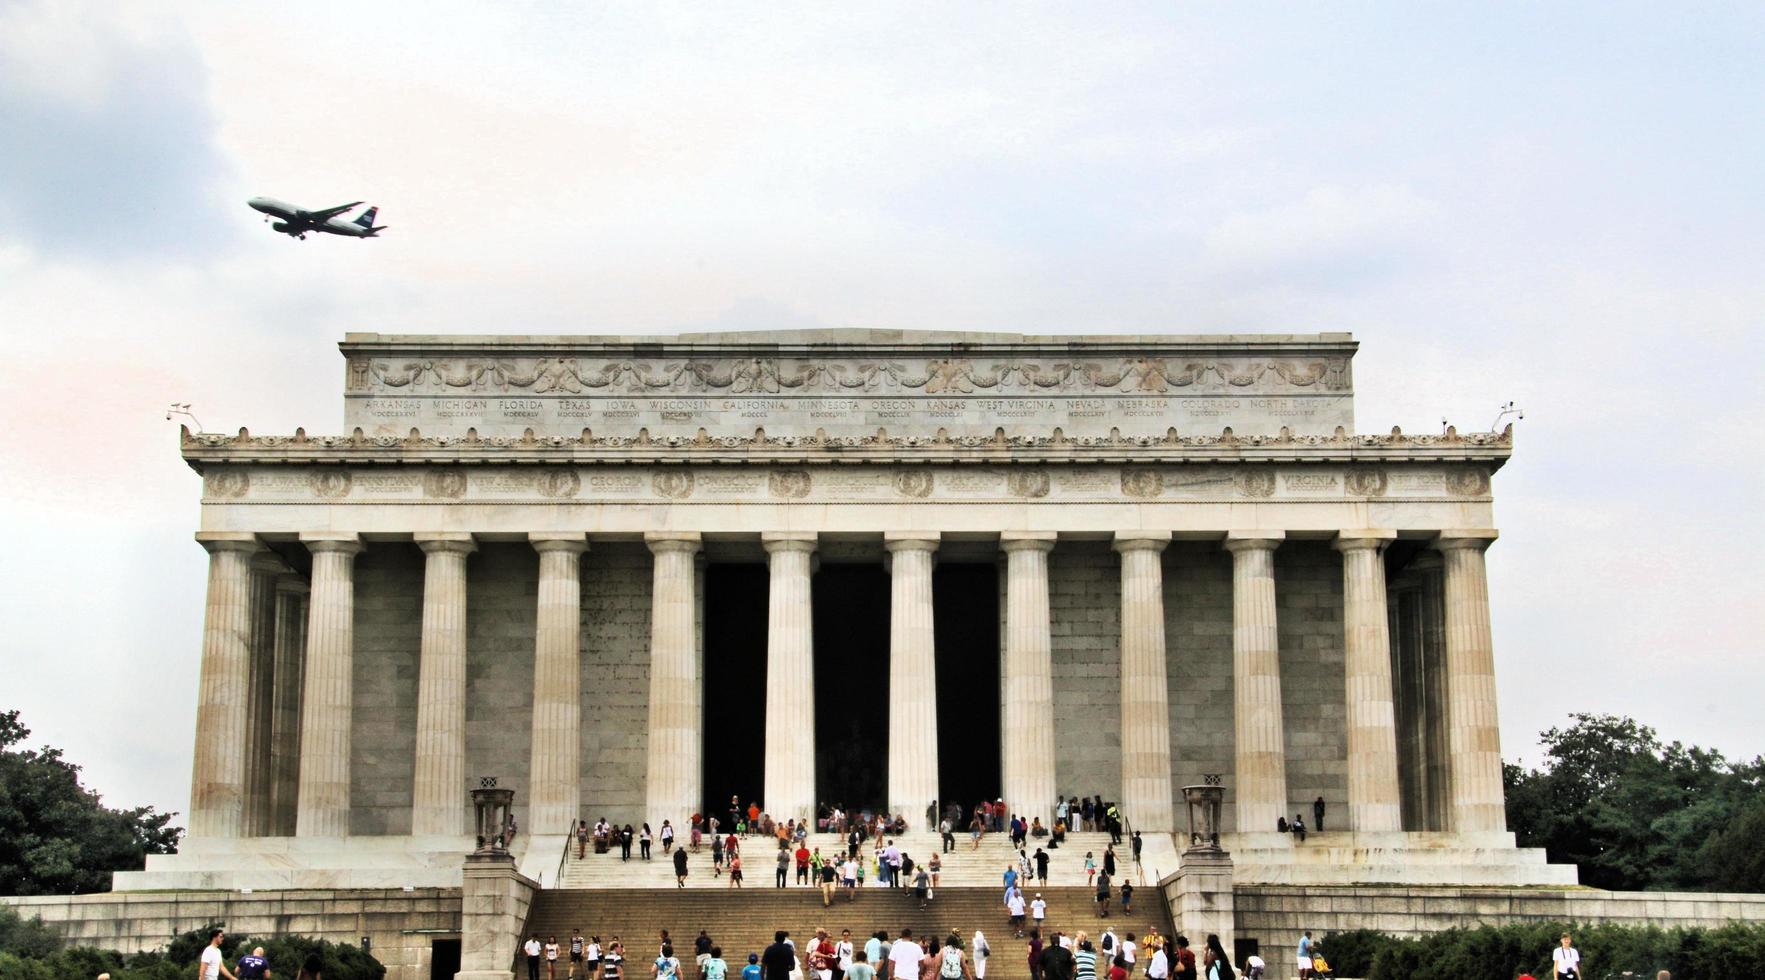 Washington in the USA in 2015. A view of the Lincoln Memorial photo